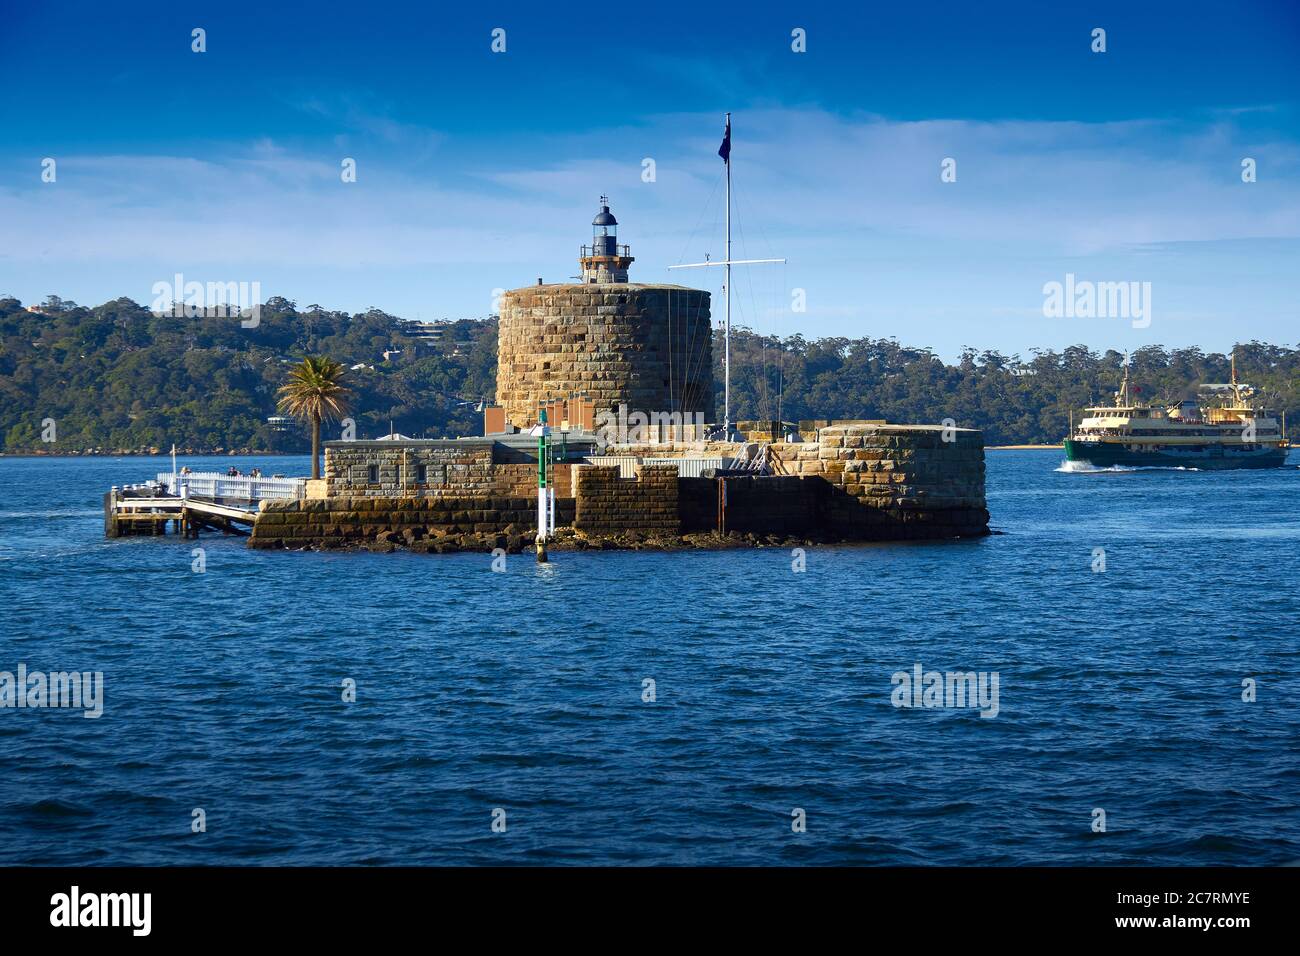 Fort Denison, Located in Sydney Harbour, NSW, Australia. A Manley Ferry Inbound To Circular Quay To The Right Of Image. Stock Photo